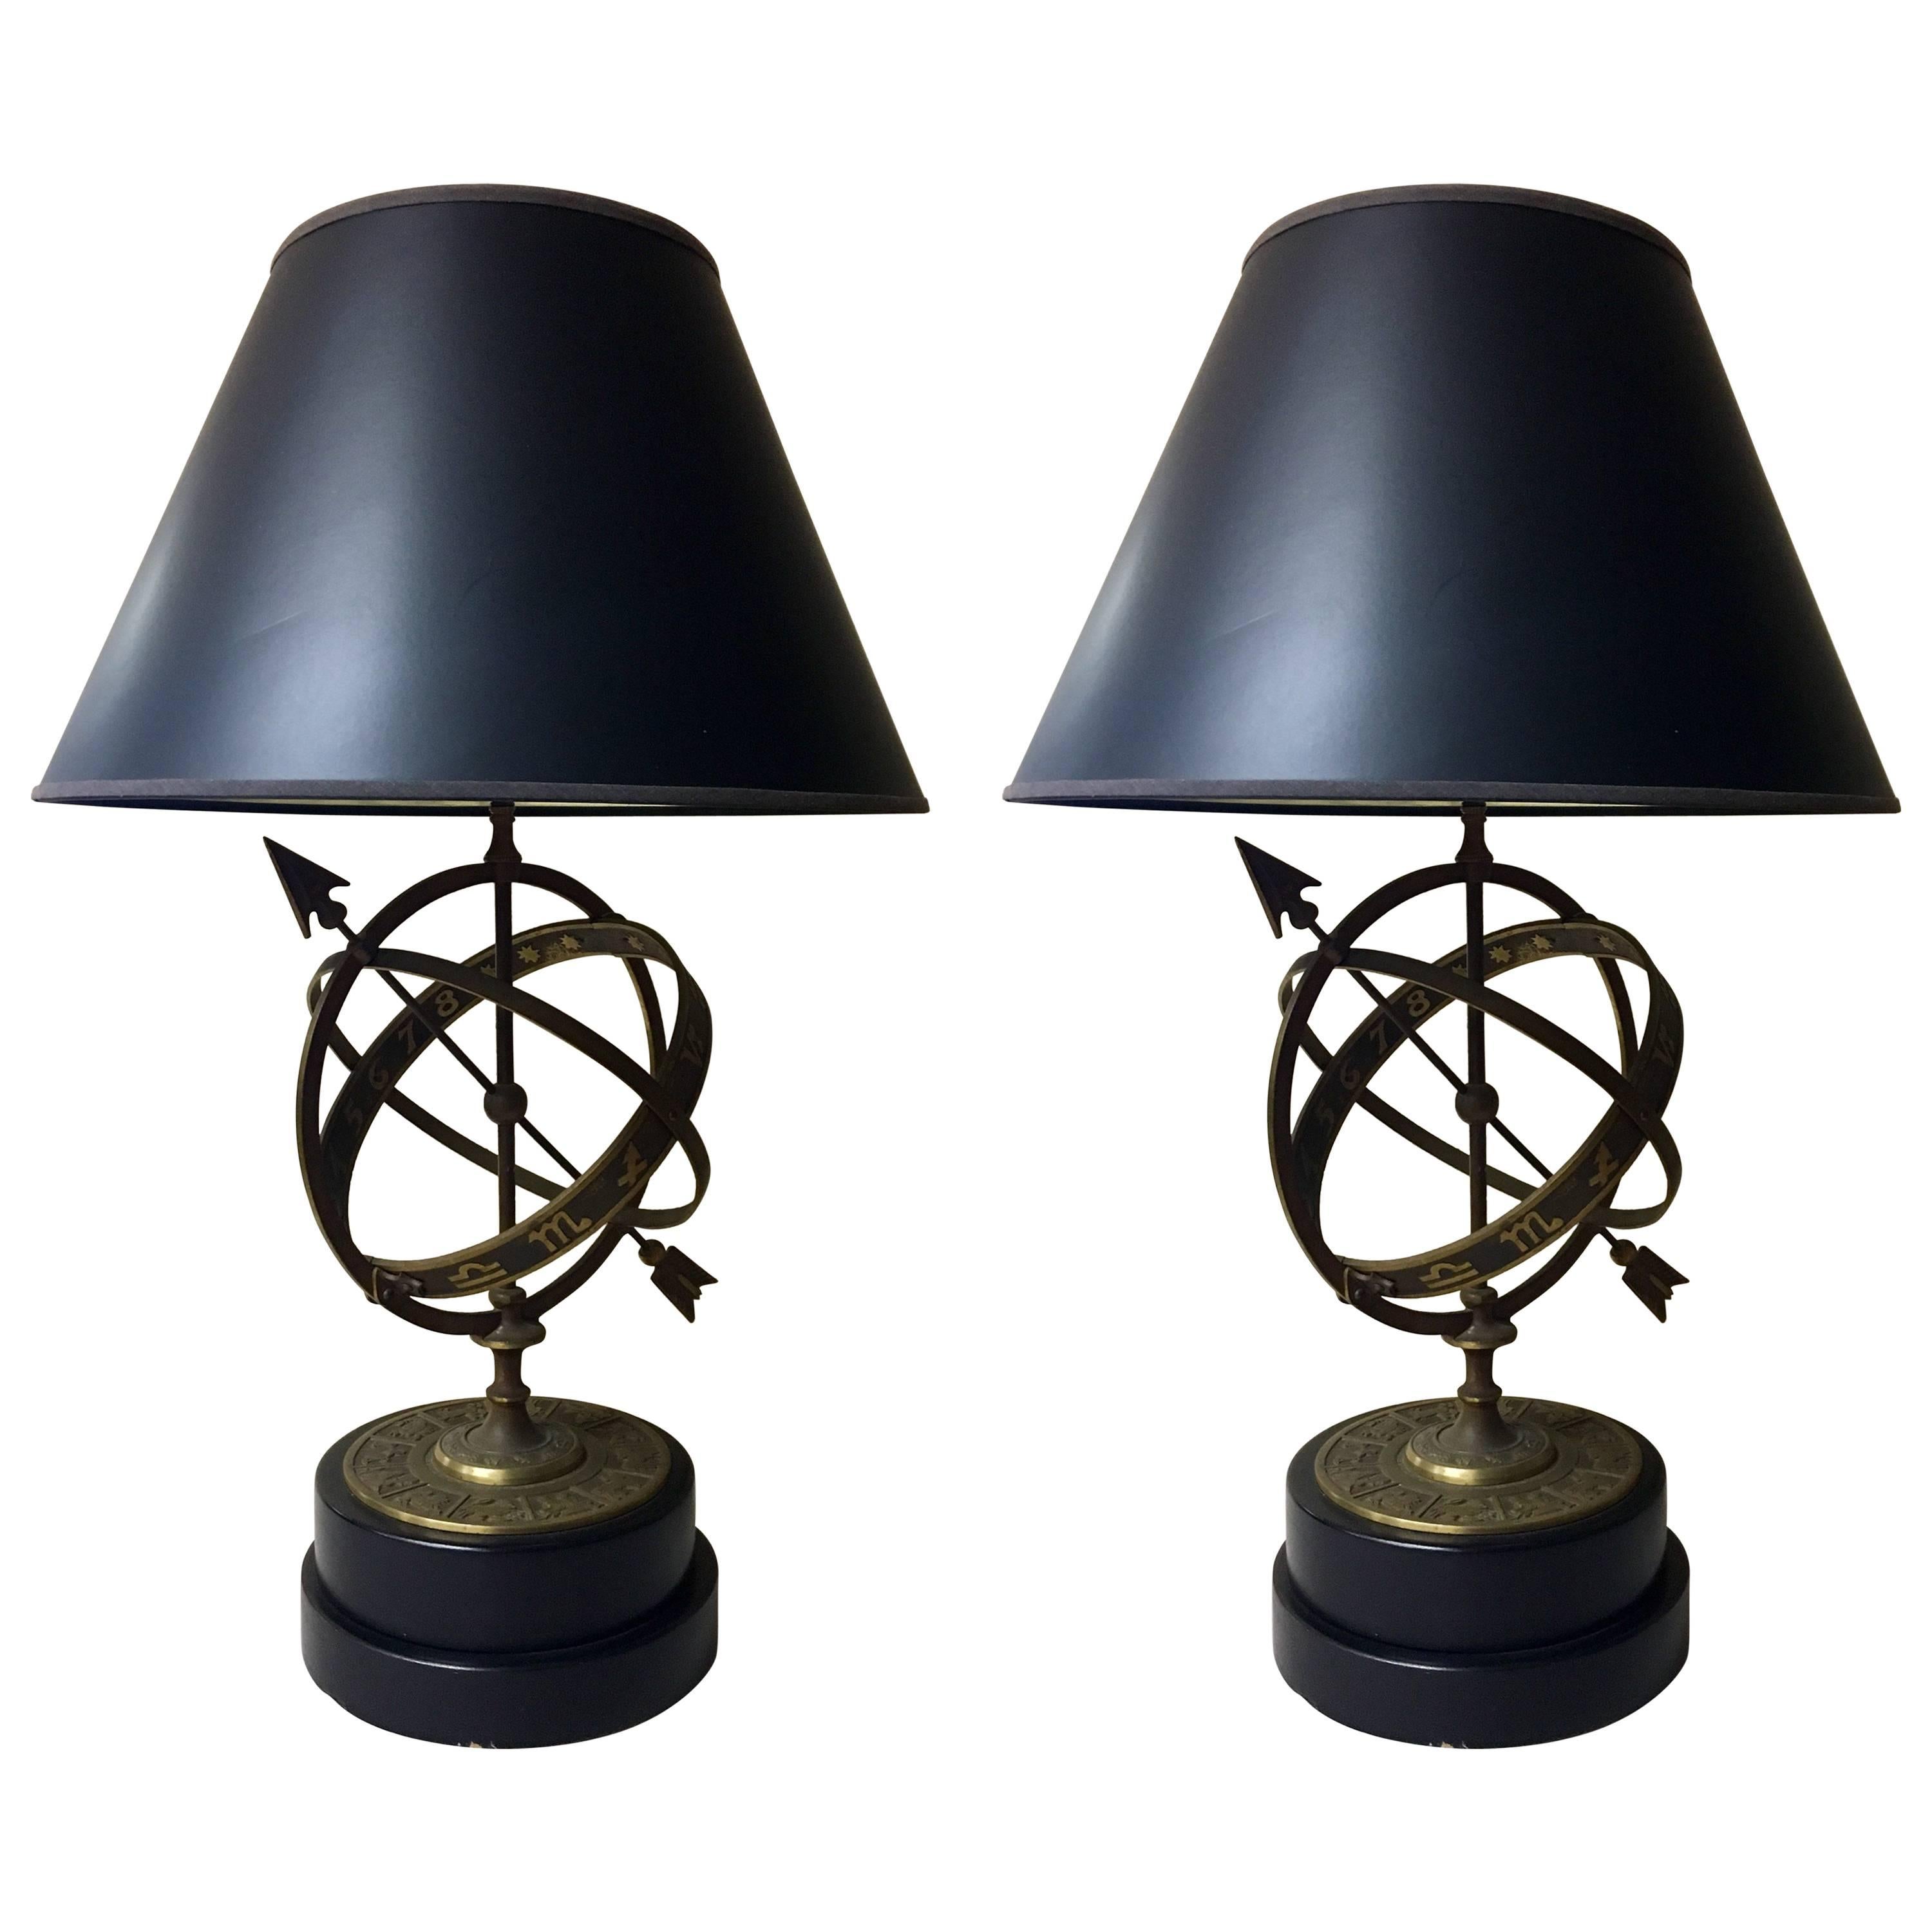 Pair of Classic Astrological Armillary Sphere Table Lamps by Frederick Cooper